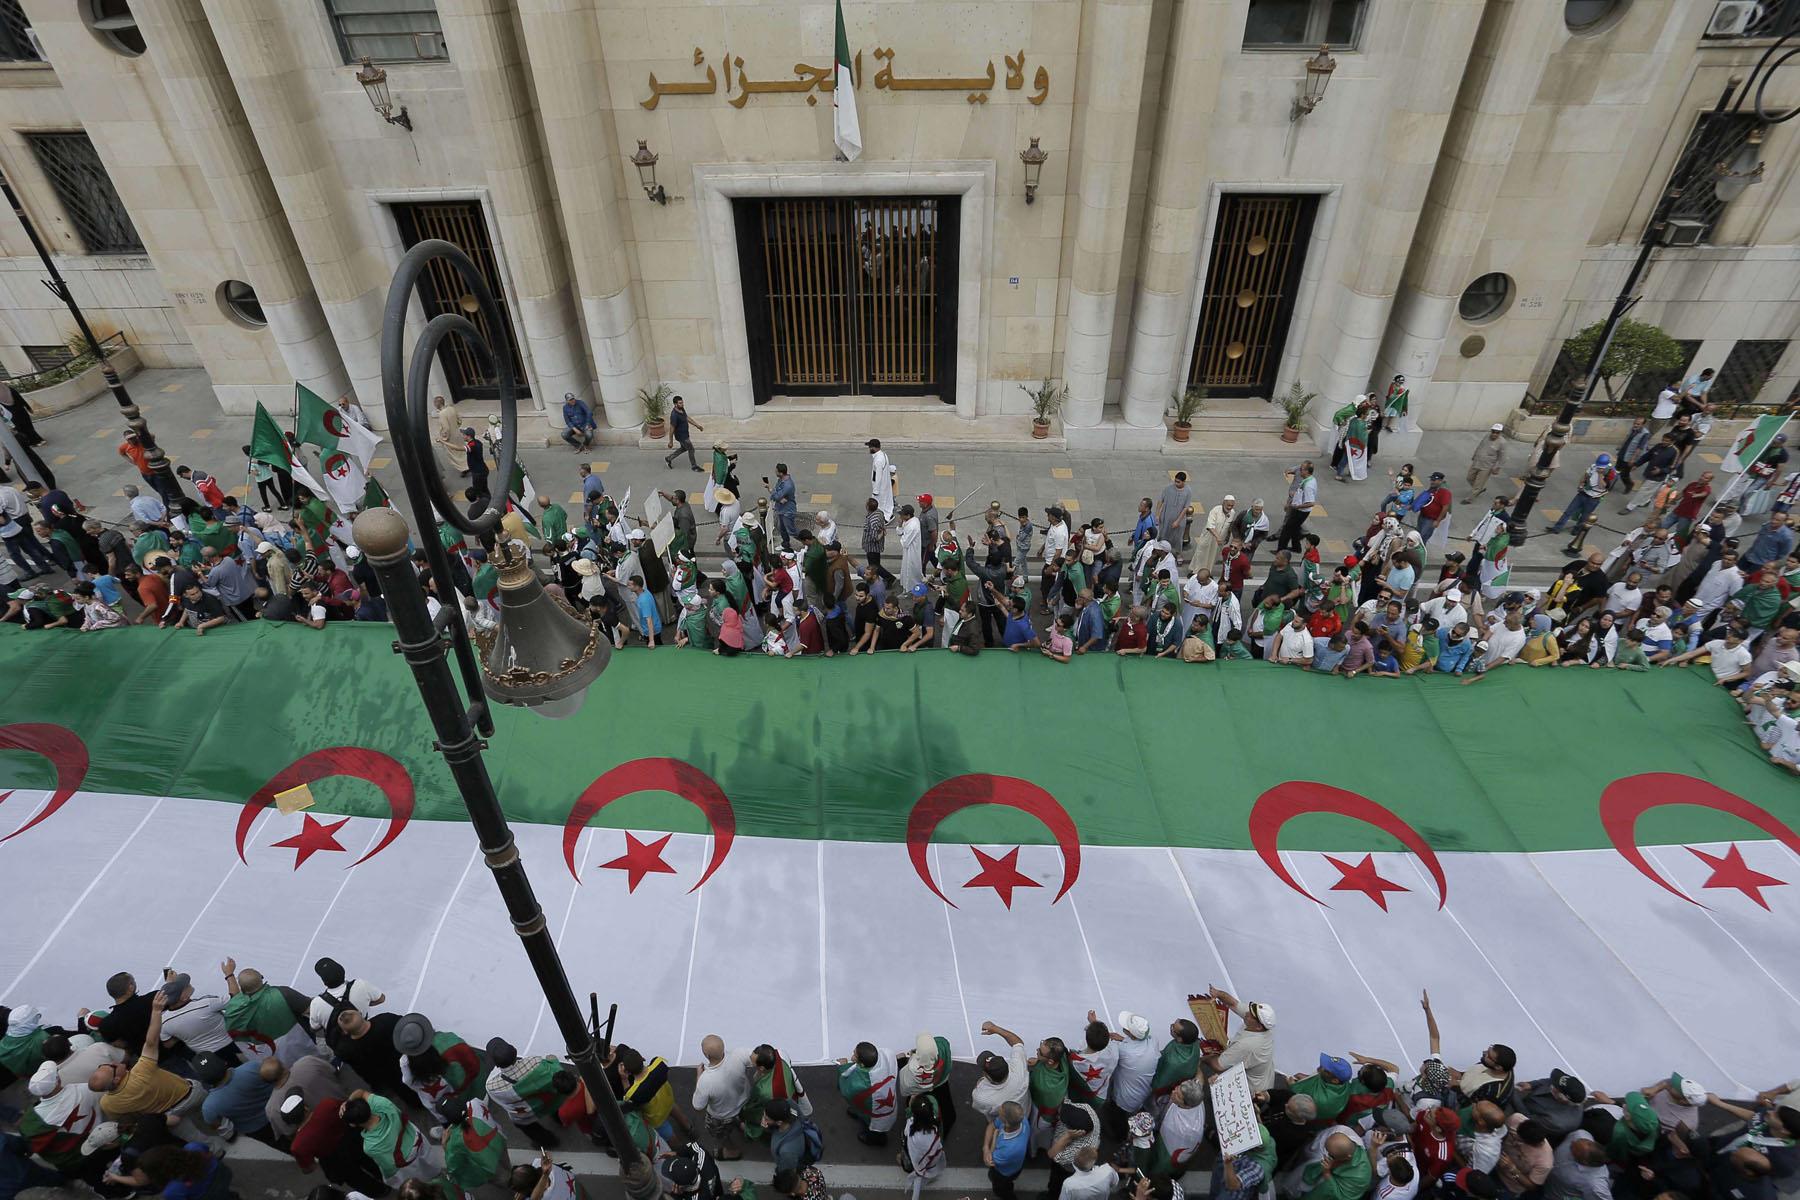 The July vote had been backed by Algeria's army chief, General Ahmed Gaid Salah, a key powerbroker